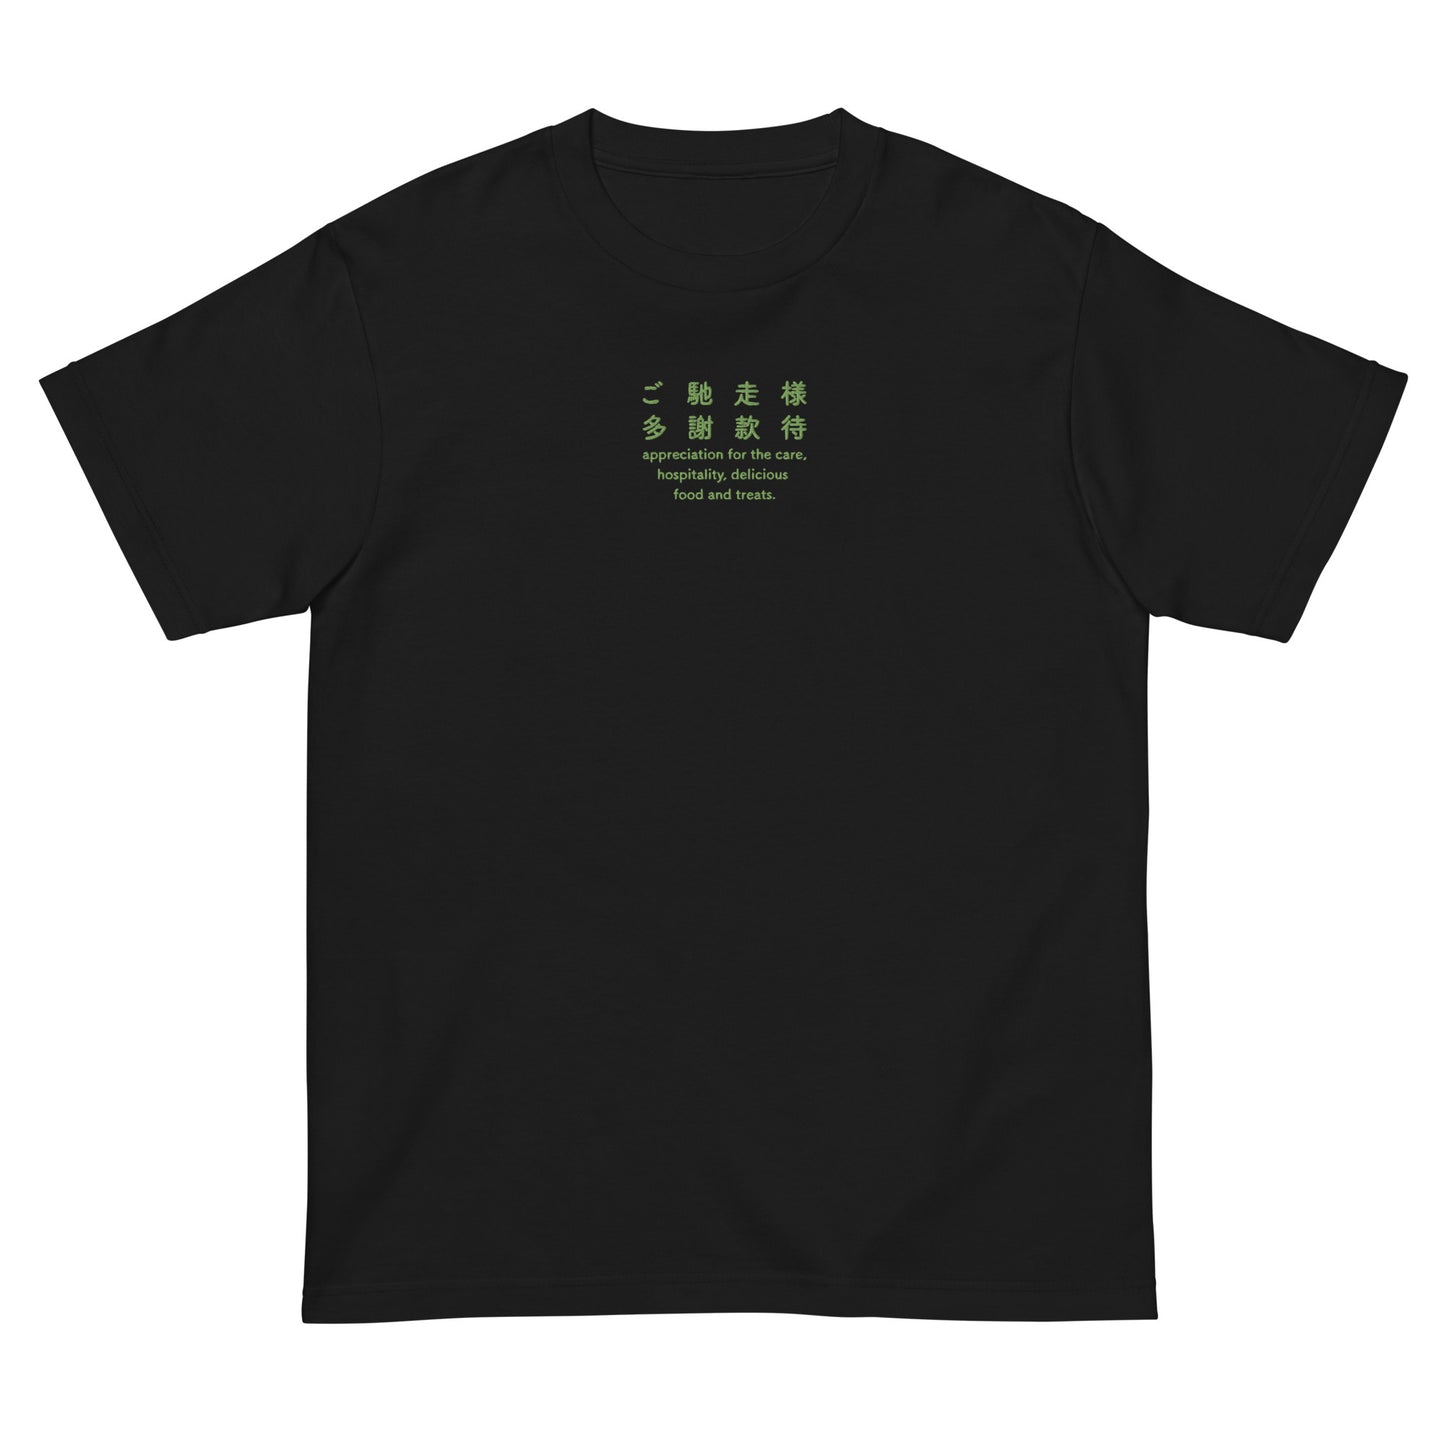 Black High Quality Tee - Front Design with an Green Embroidery "Gochisosama" in Japanese,Chinese and English